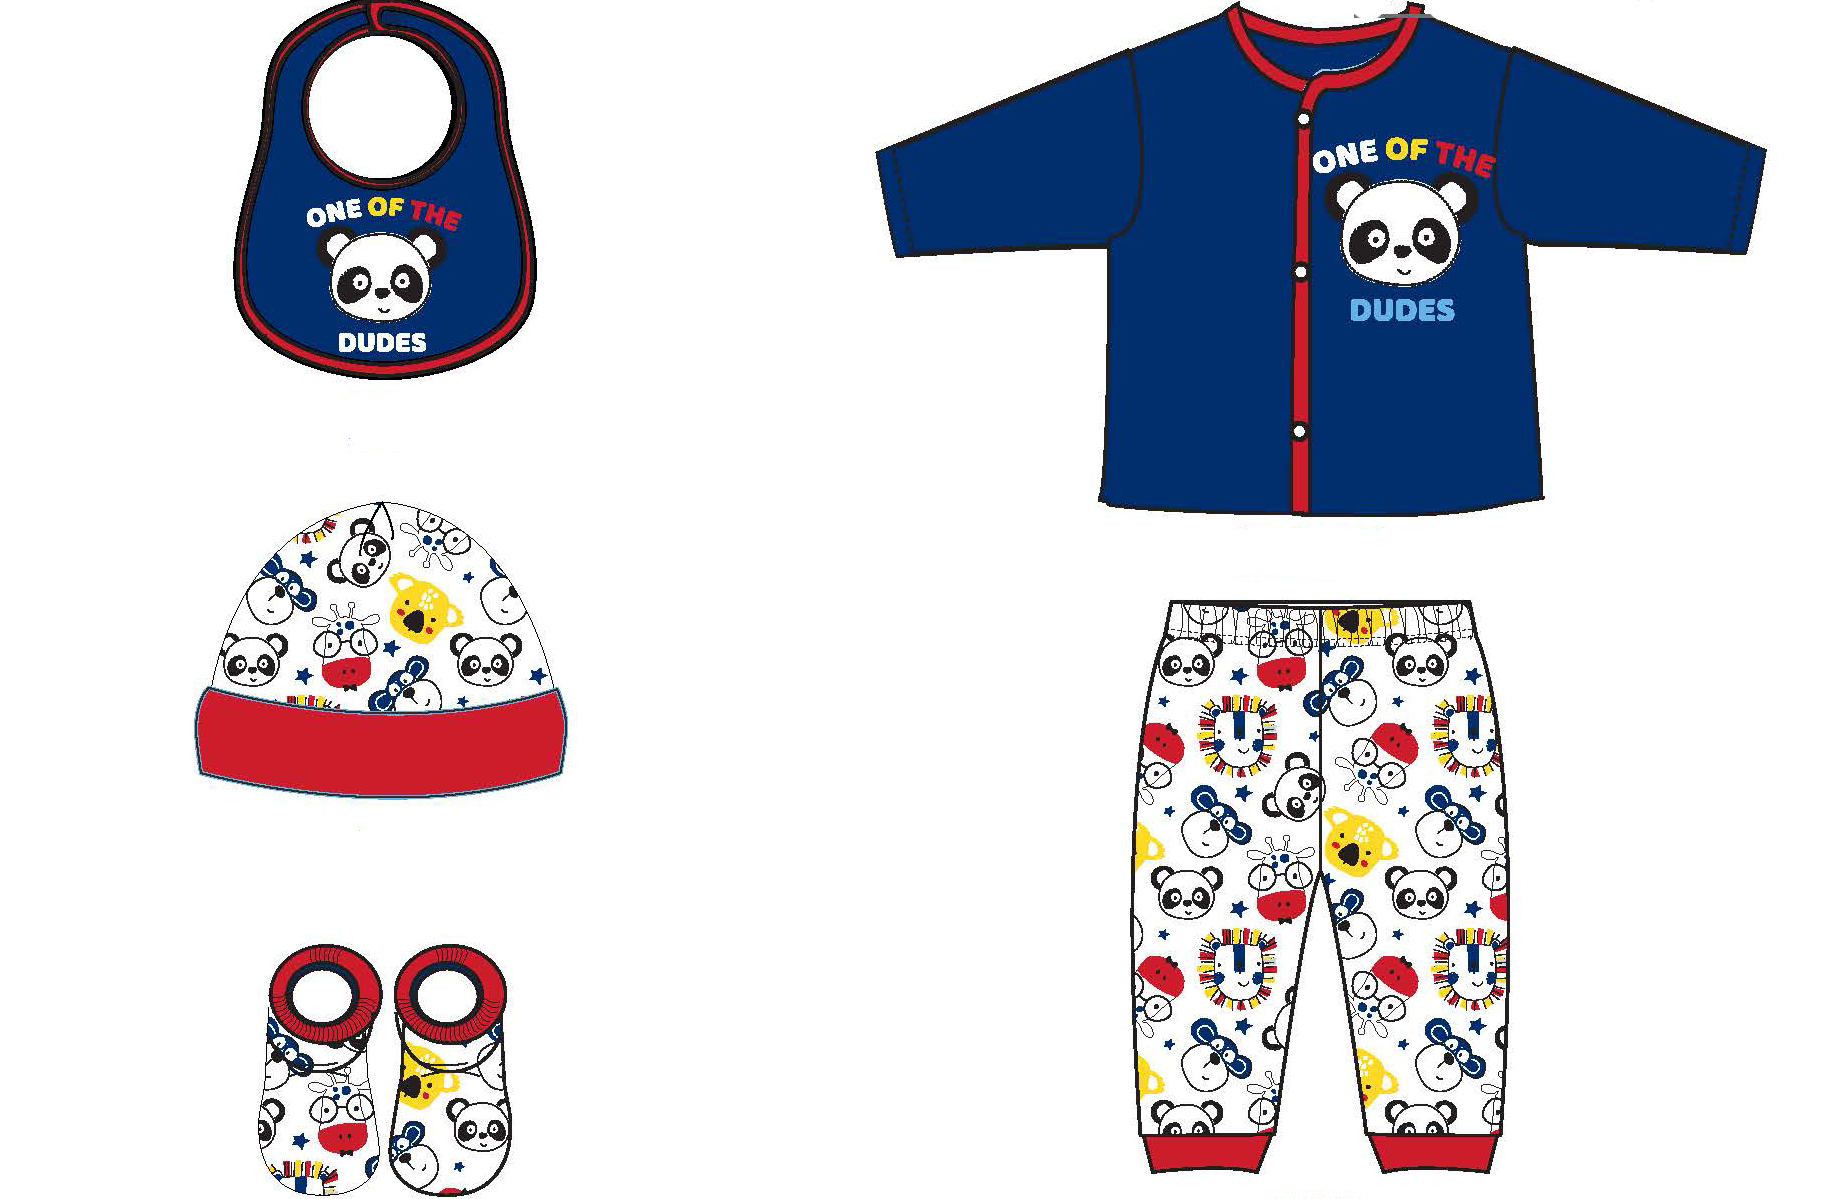 5 PC. Baby Boy's Printed Cardigan & Apparel Sets w/ One Of The Dudes Panda Print